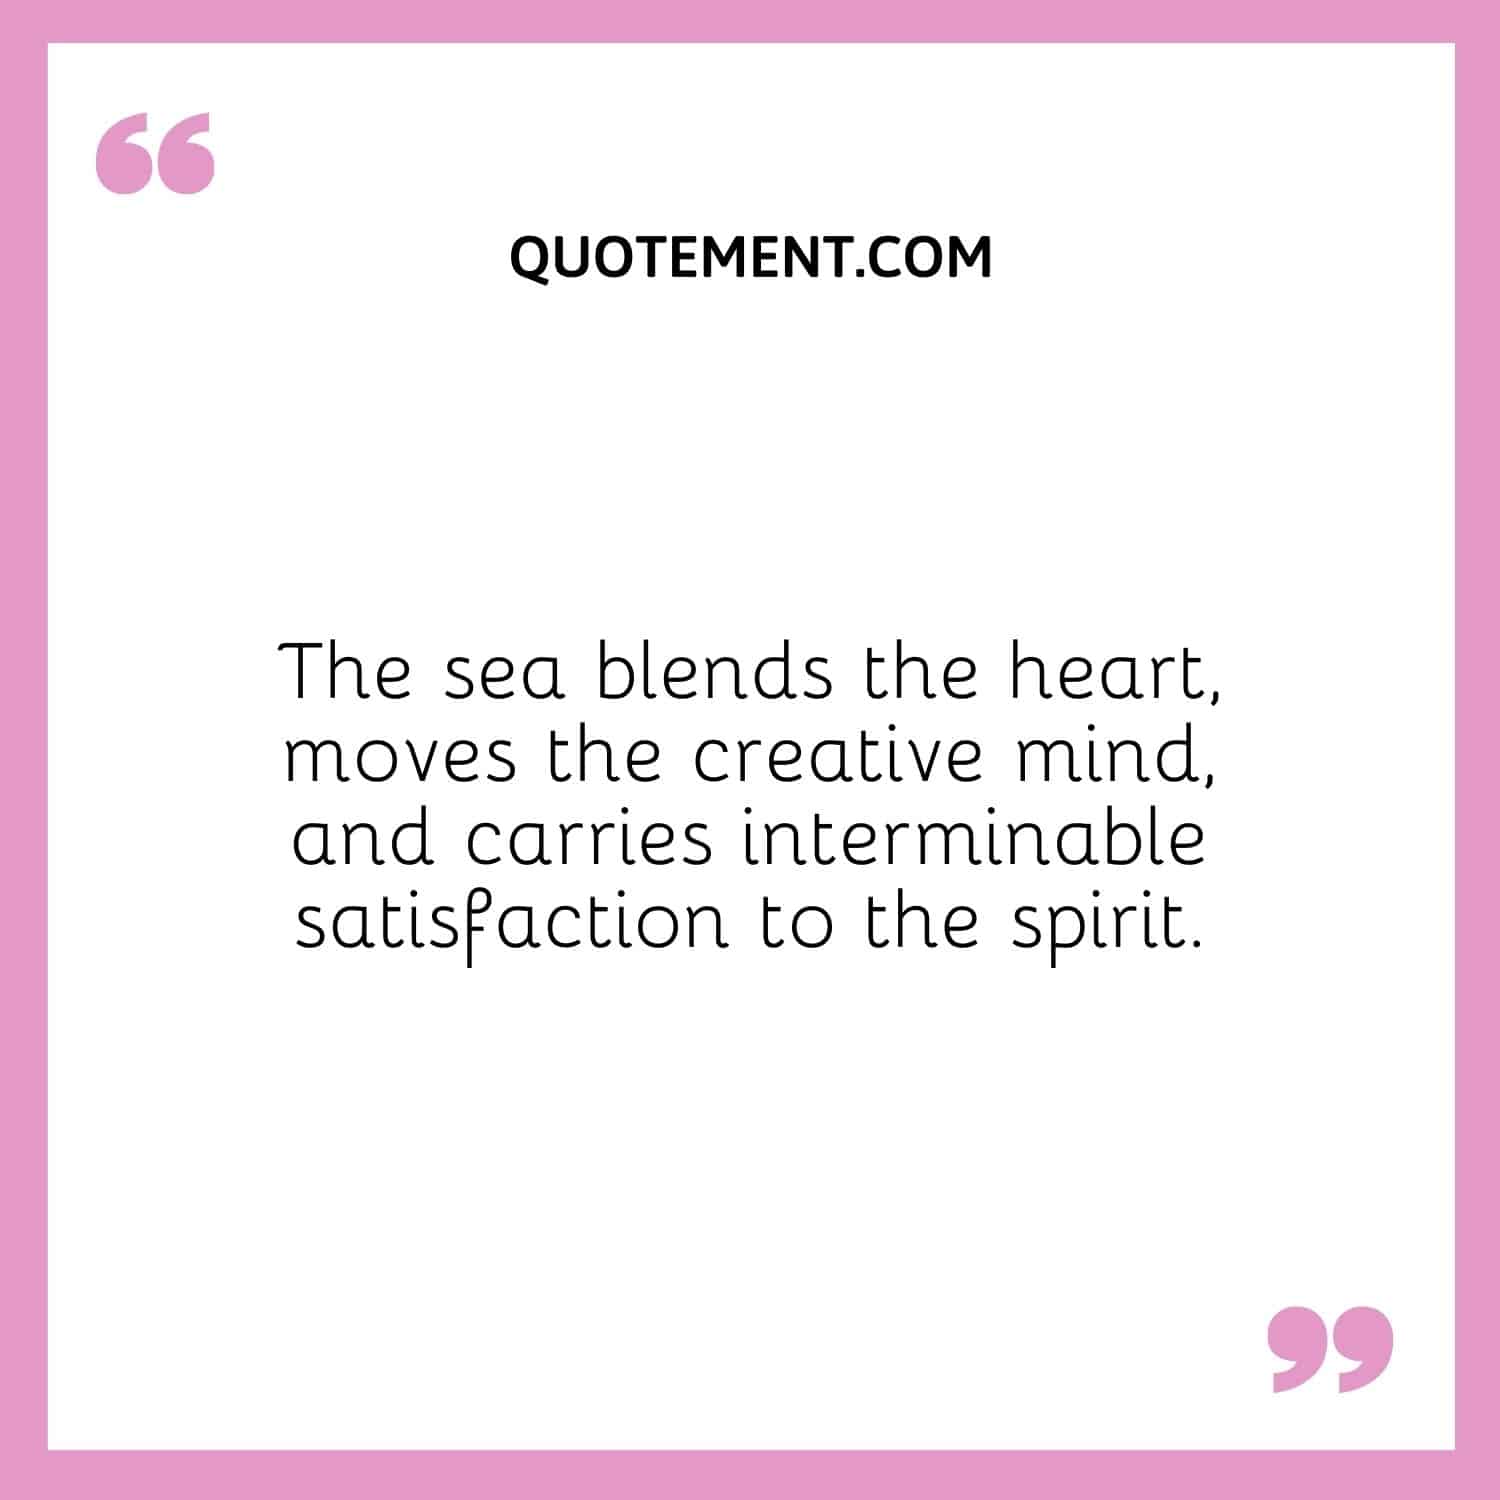 The sea blends the heart, moves the creative mind, and carries interminable satisfaction to the spirit.